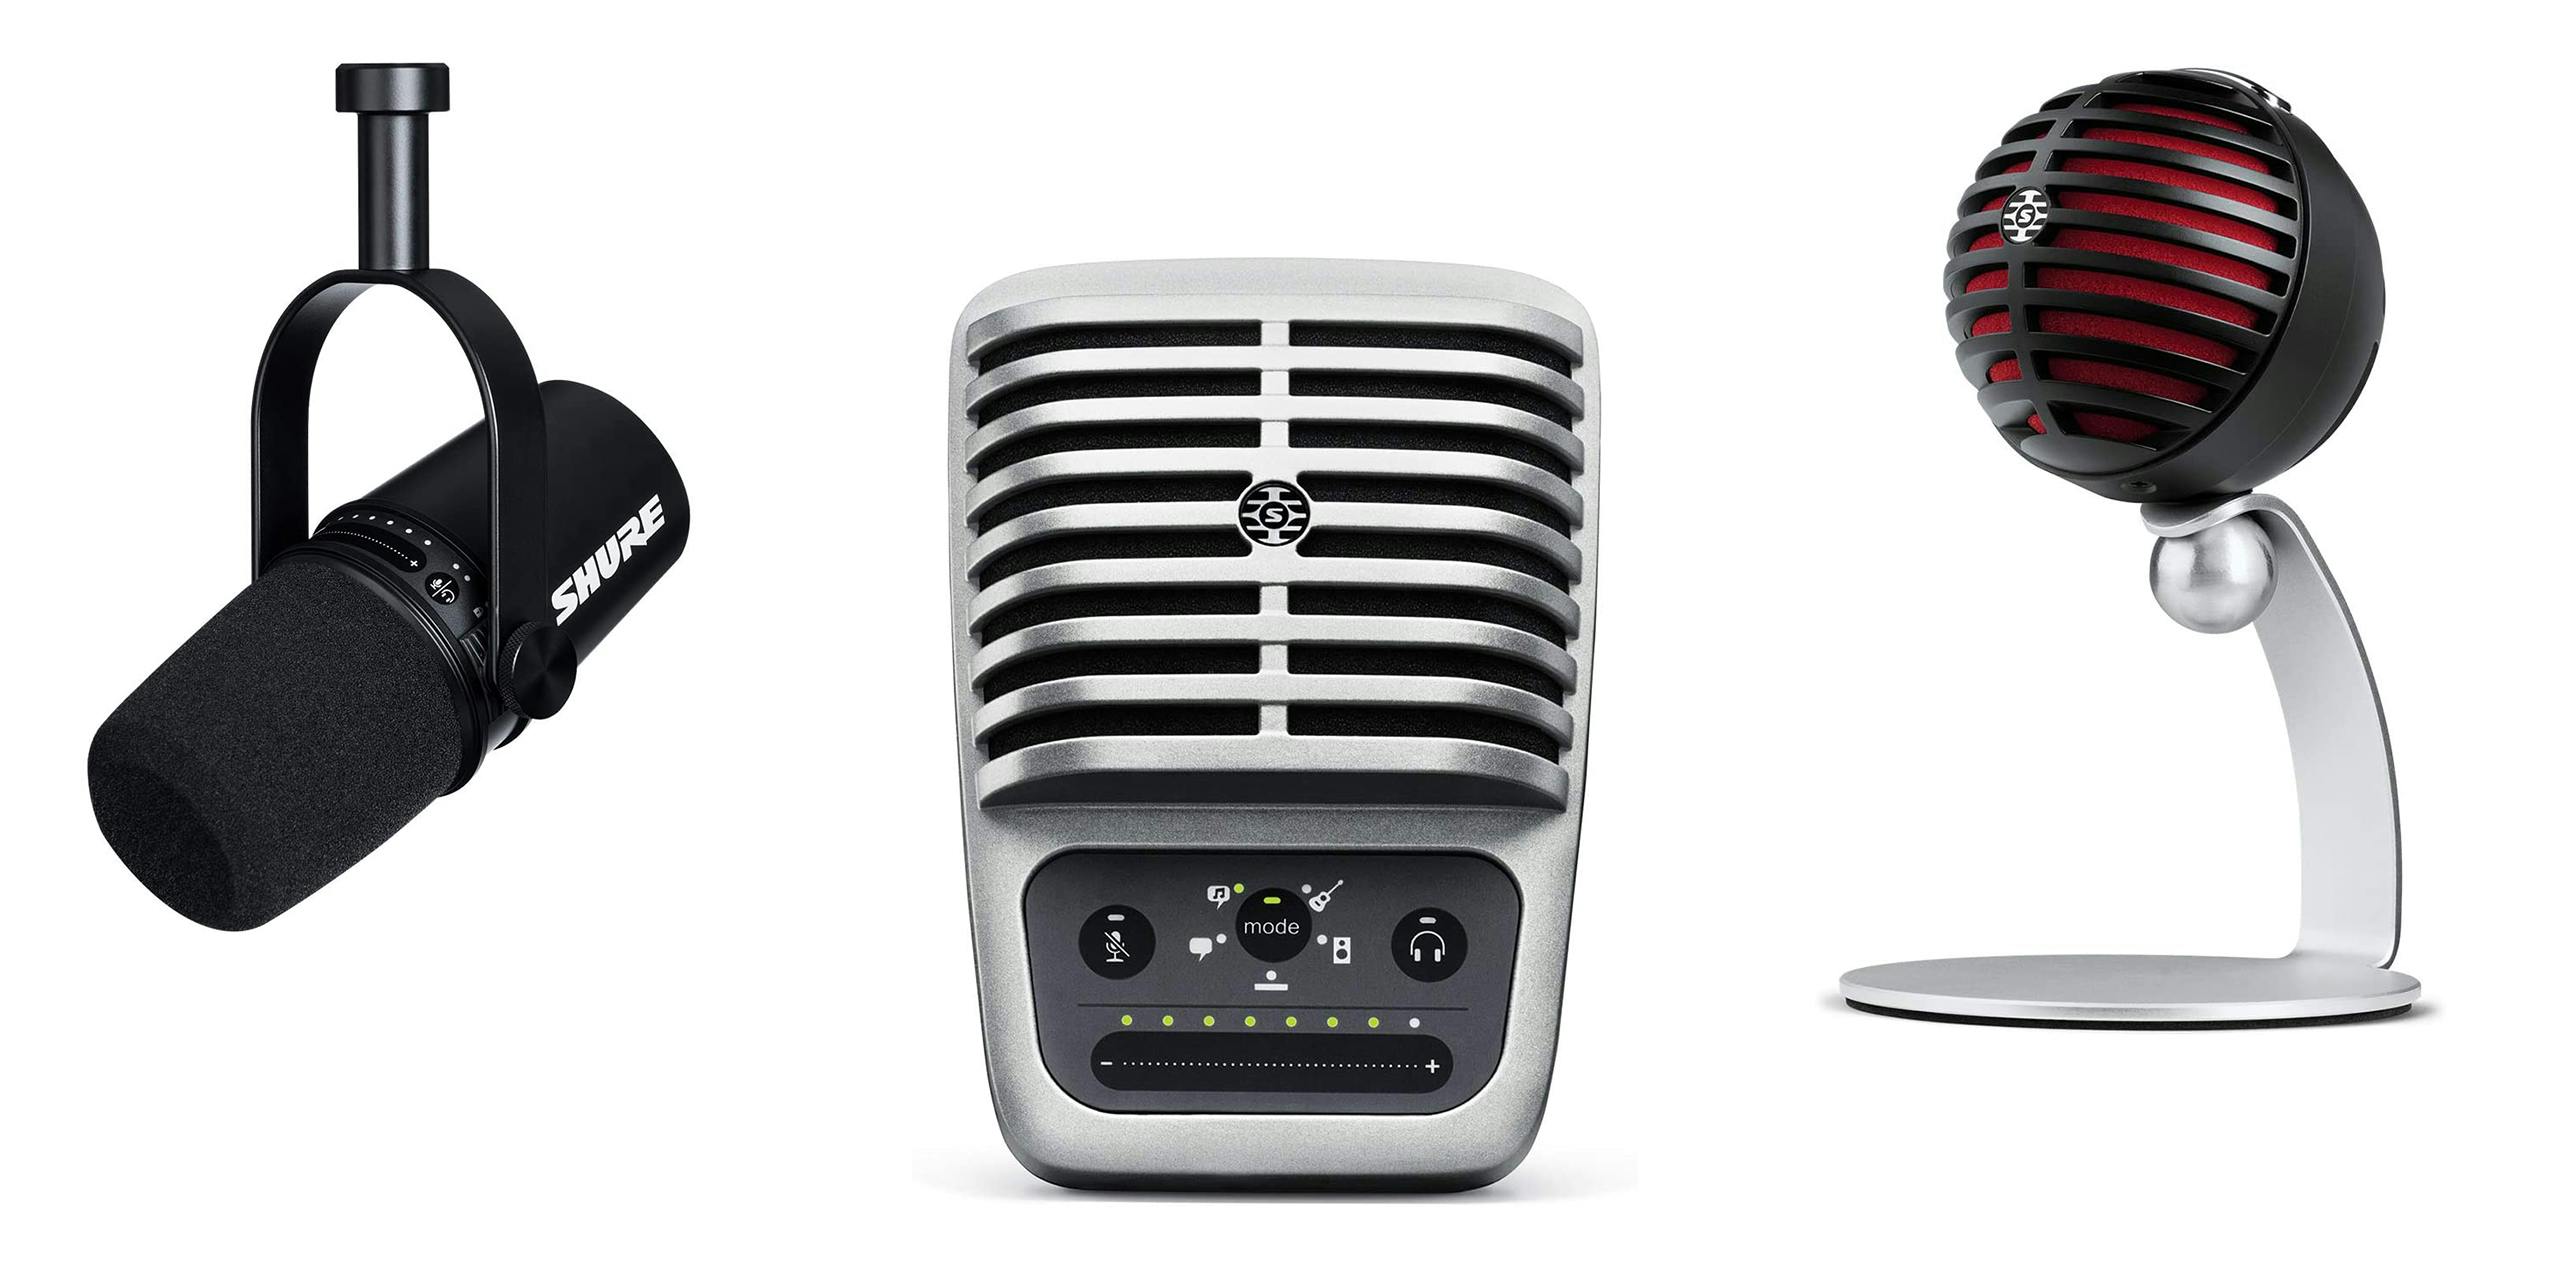 Three different Shure microphones on sale on Amazon for Black Friday.